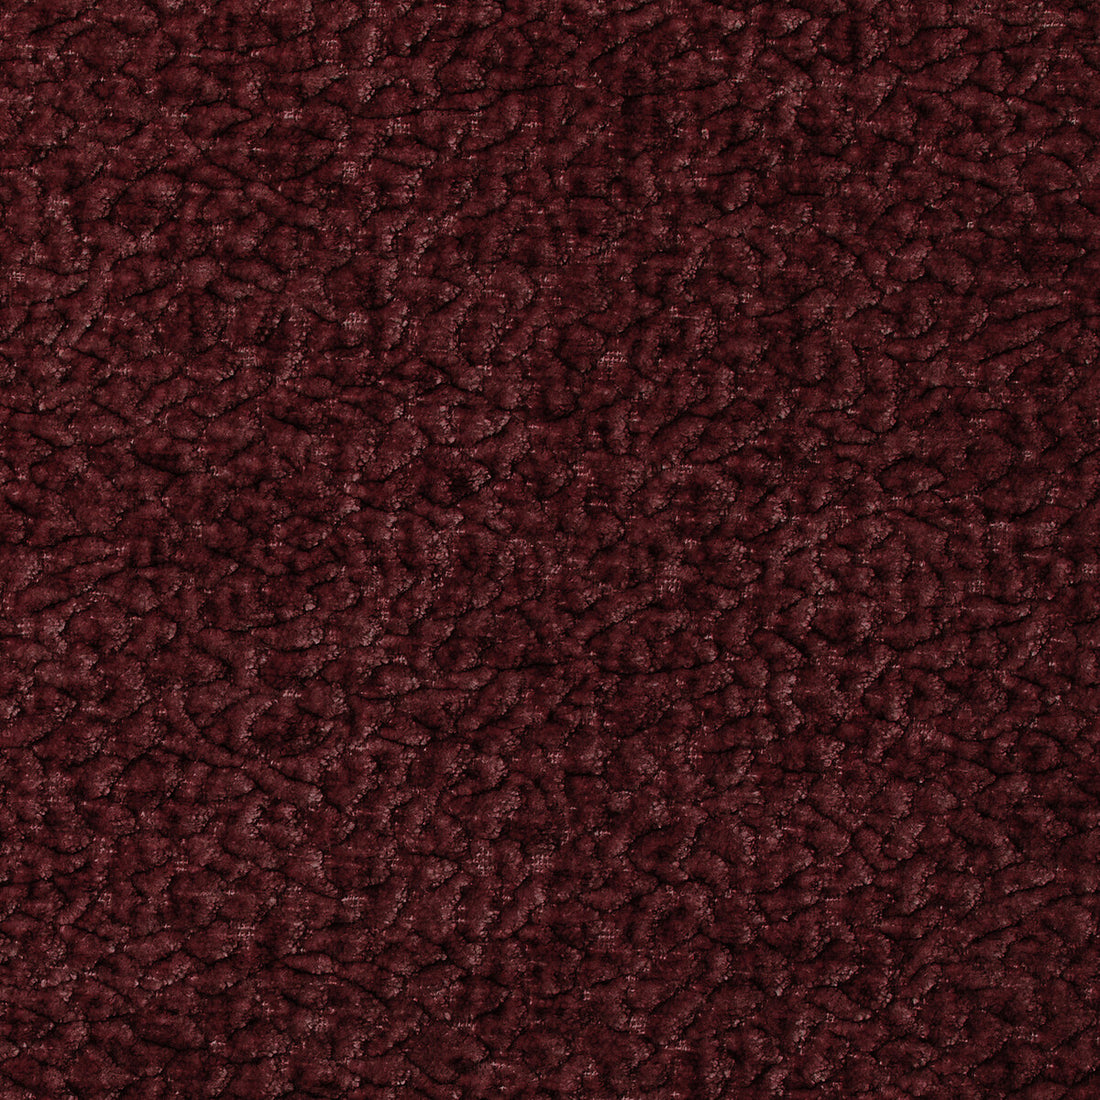 Barton Chenille fabric in cabernet color - pattern 36074.9.0 - by Kravet Smart